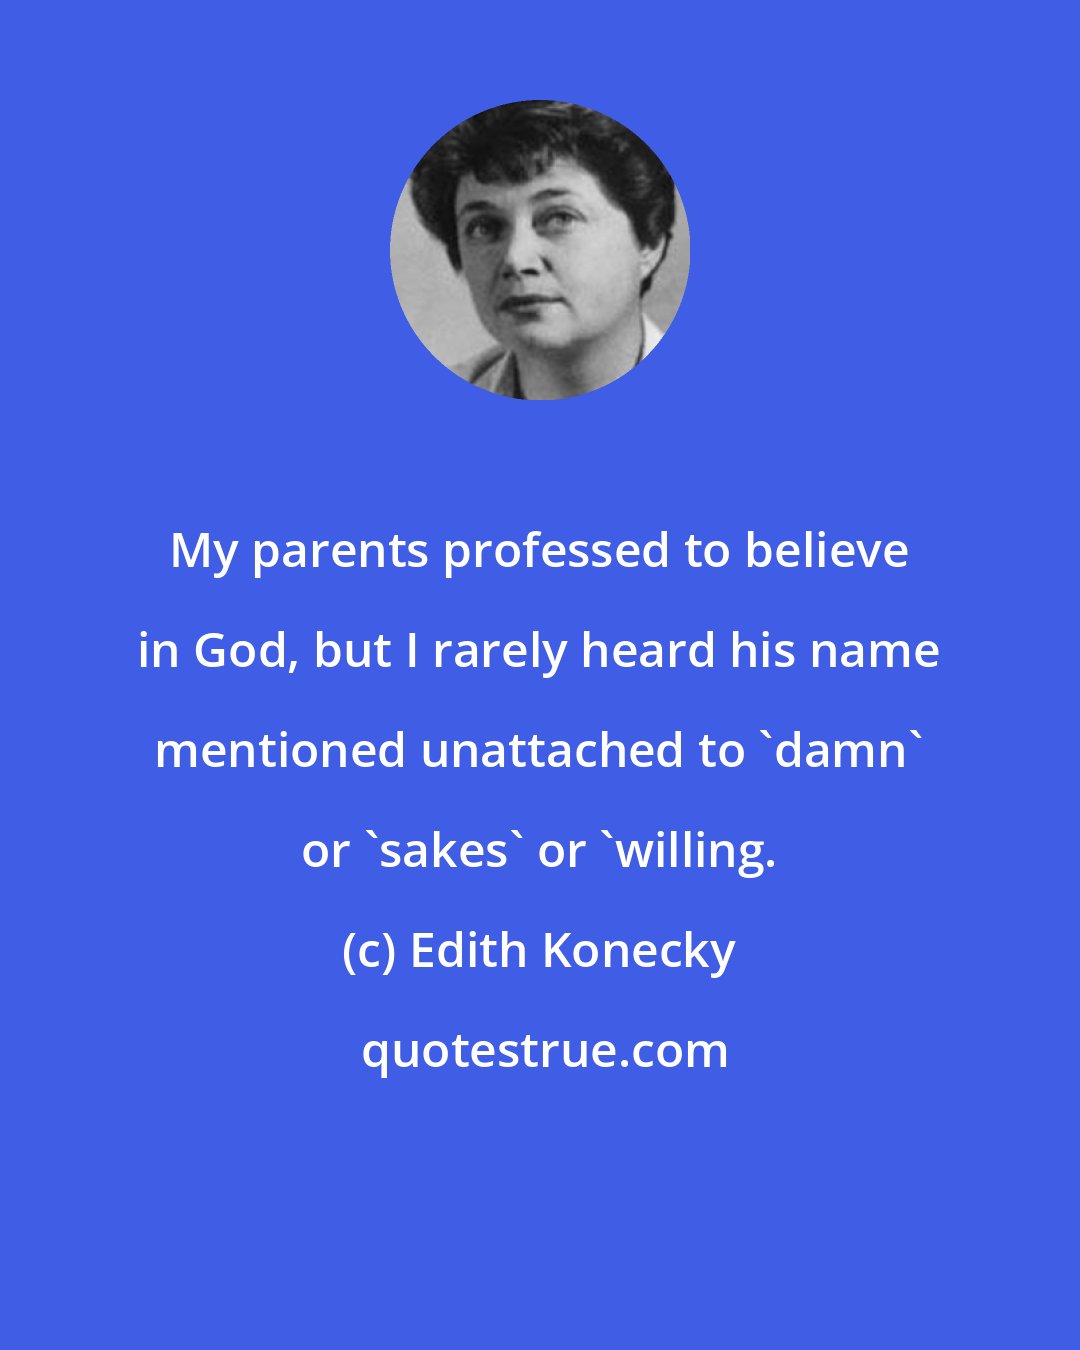 Edith Konecky: My parents professed to believe in God, but I rarely heard his name mentioned unattached to 'damn' or 'sakes' or 'willing.